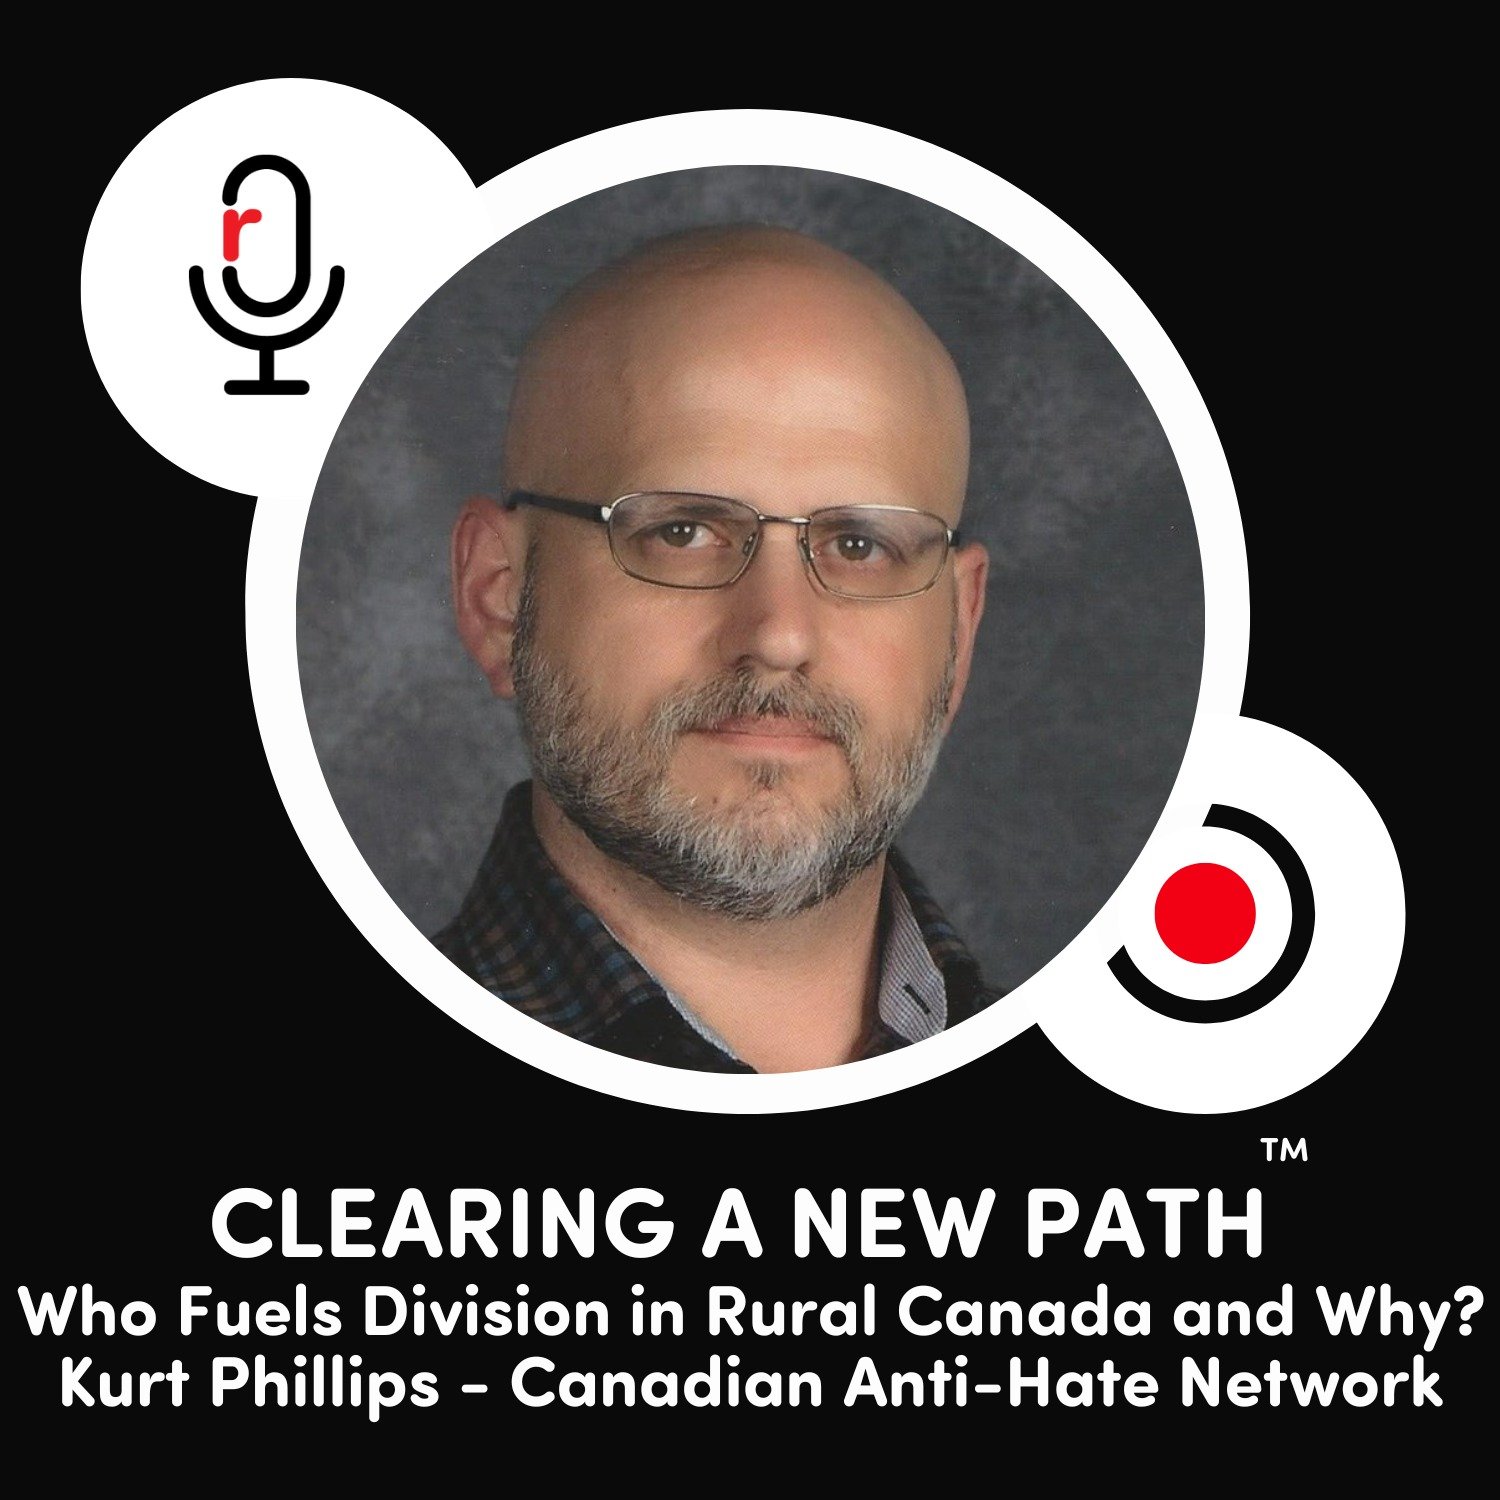 Who Fuels Division in Rural Canada and Why? Kurt Phillips - Canadian Anti-Hate Network